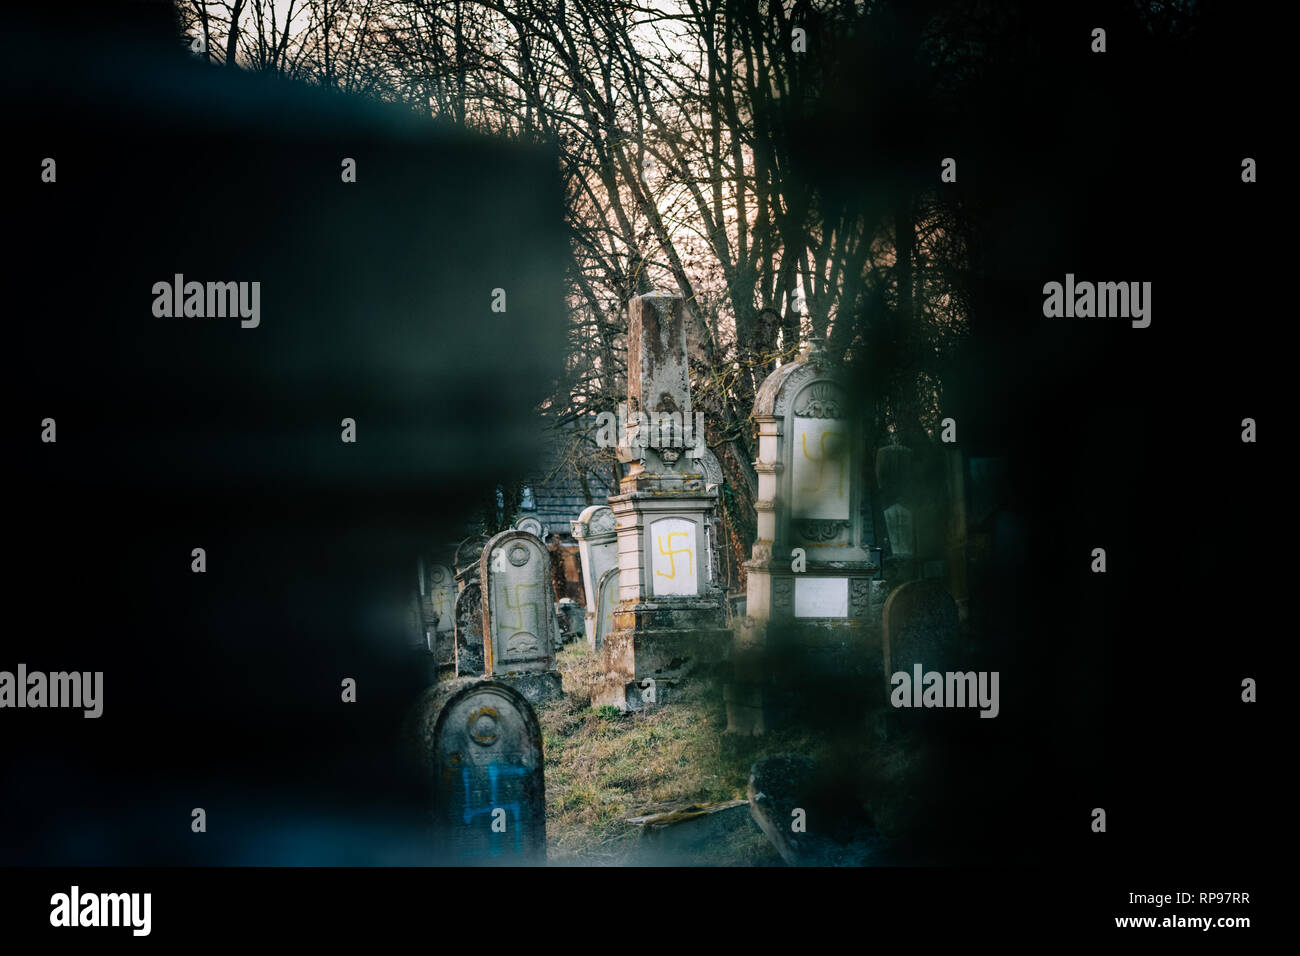 View through stones of vandalised graves with nazi symbols in yellow spray-painted on the damaged graves - Jewish cemetery in Quatzenheim near Strasbourg, France Stock Photo